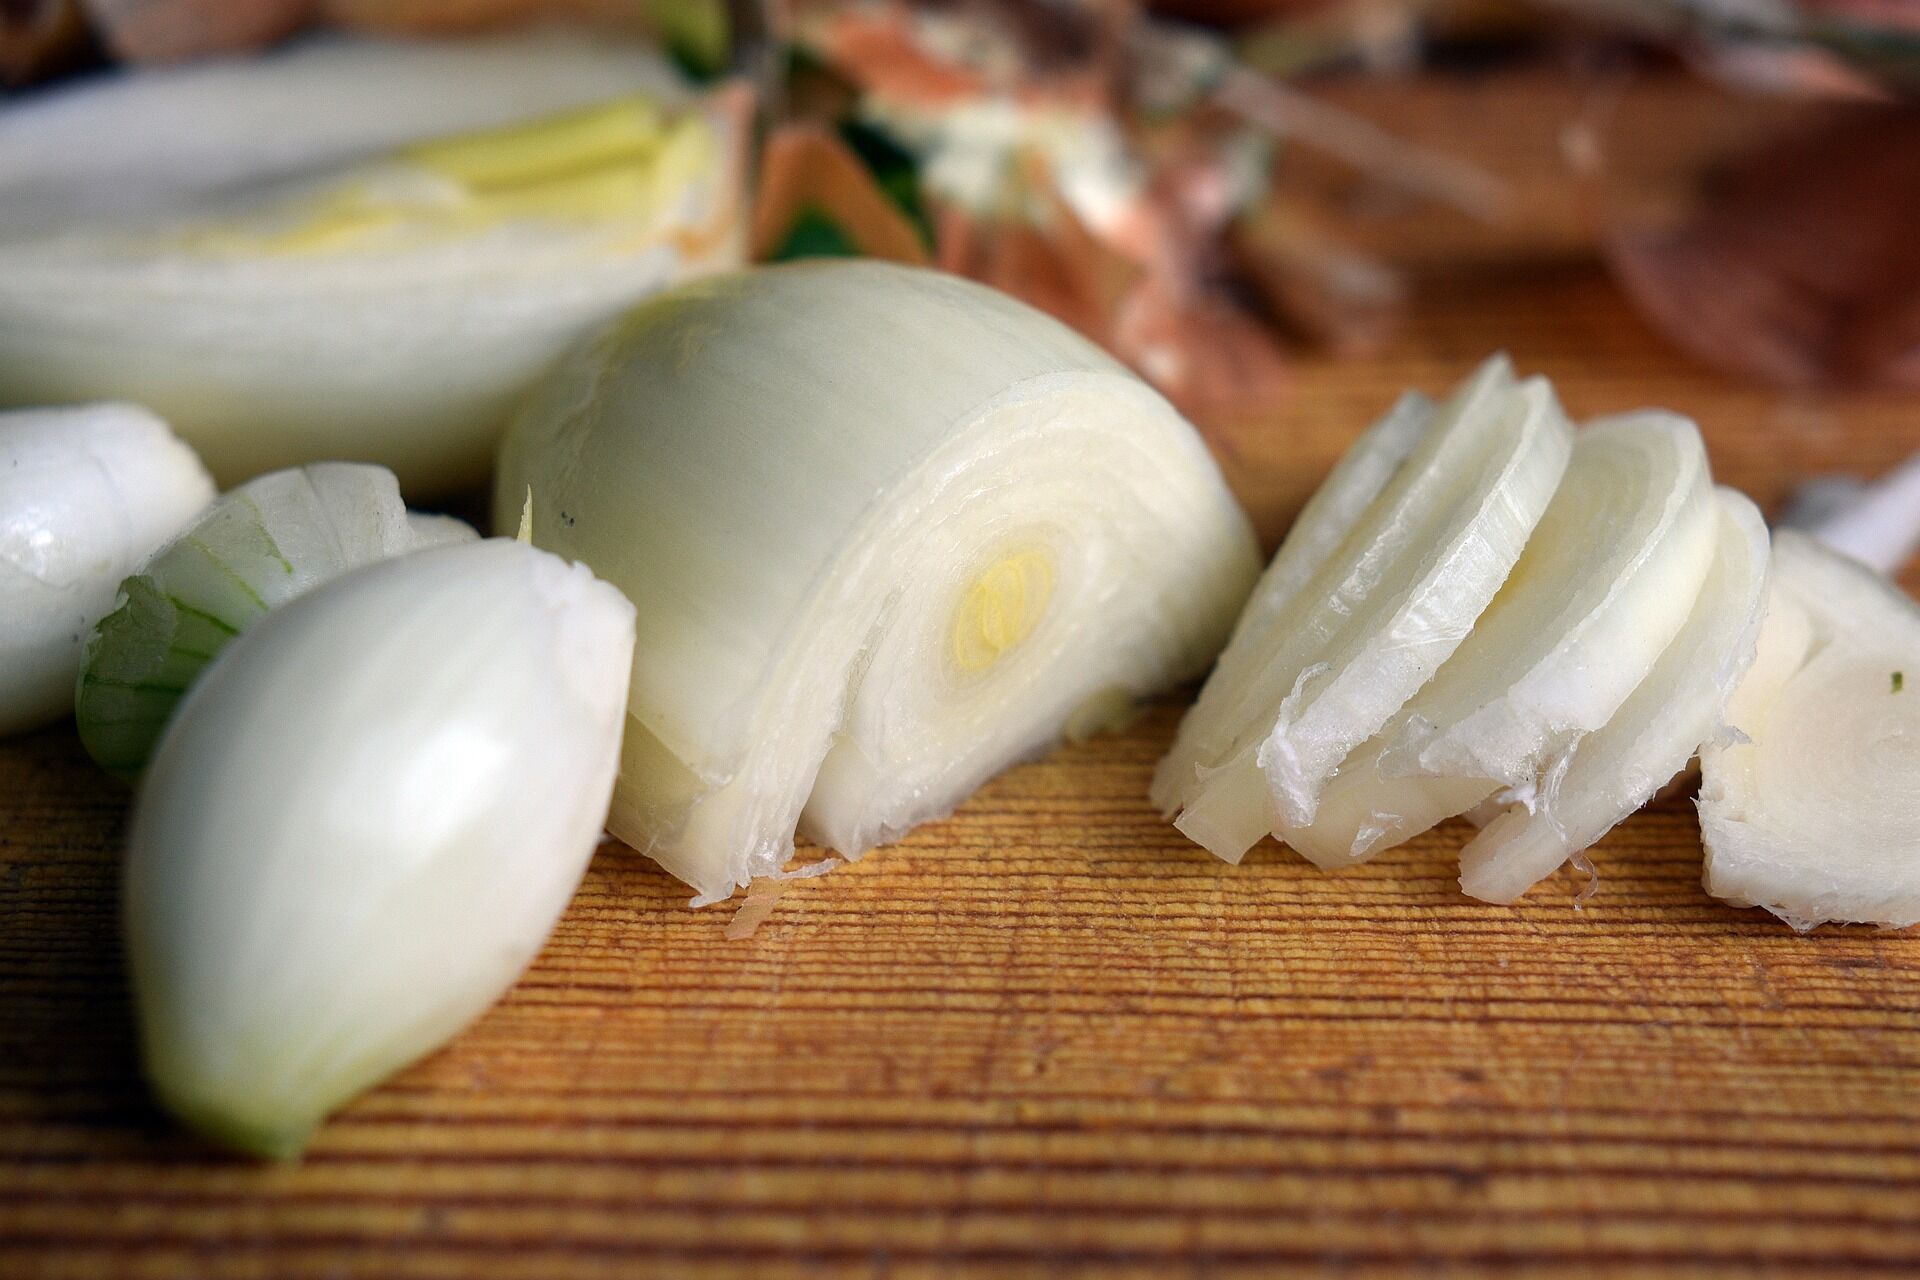 The benefits of onions